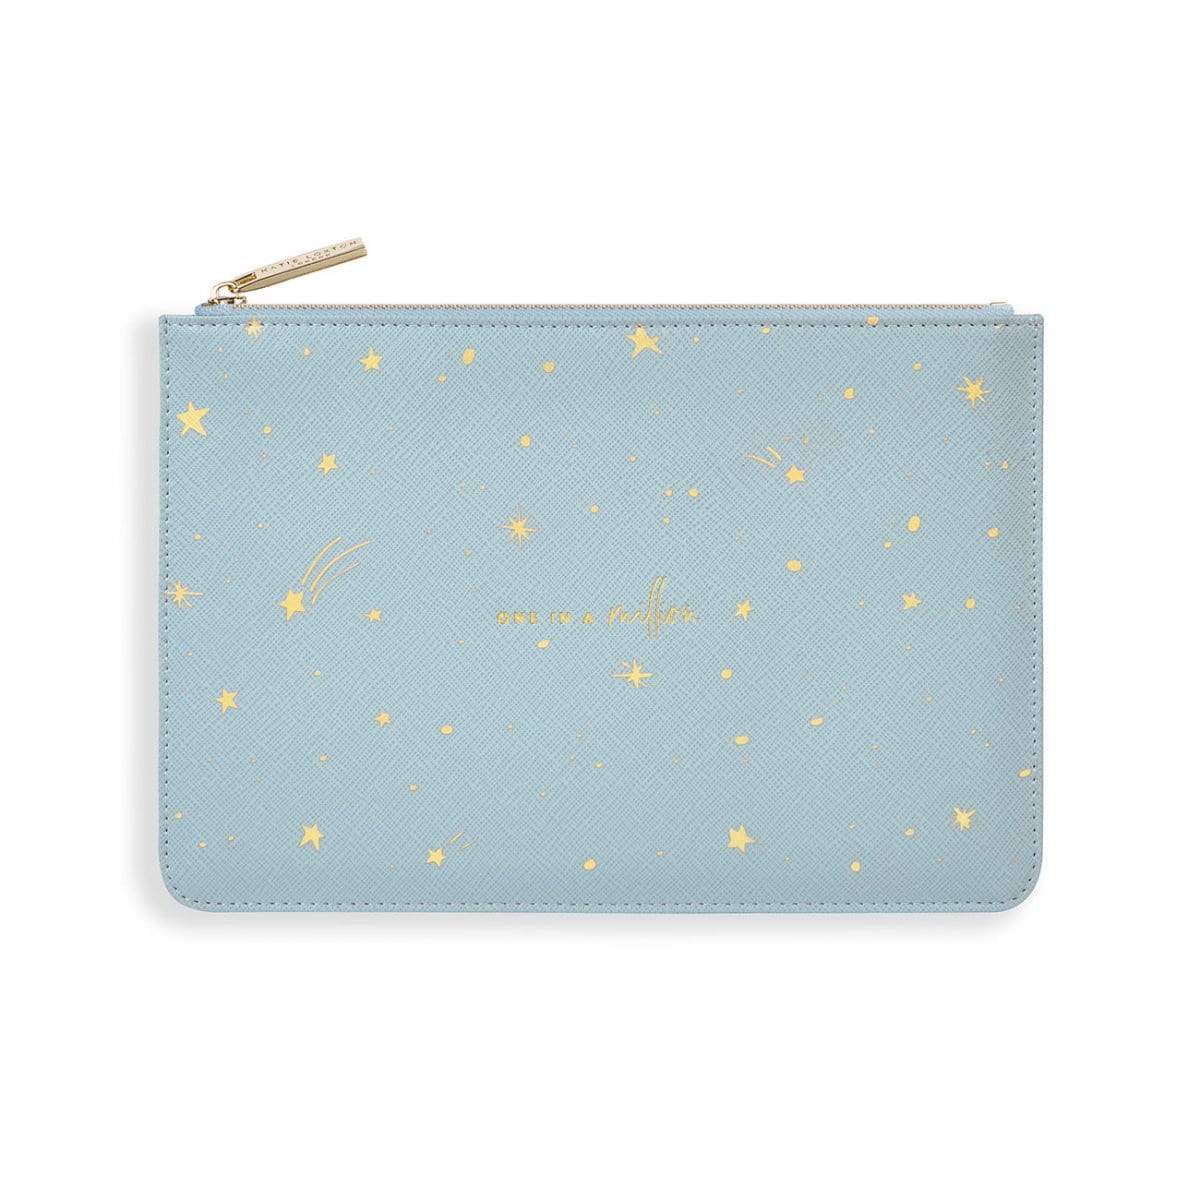 Katie Loxton Perfect Pouch Katie Loxton Gold Print Perfect Pouch - One in a Million - Blue